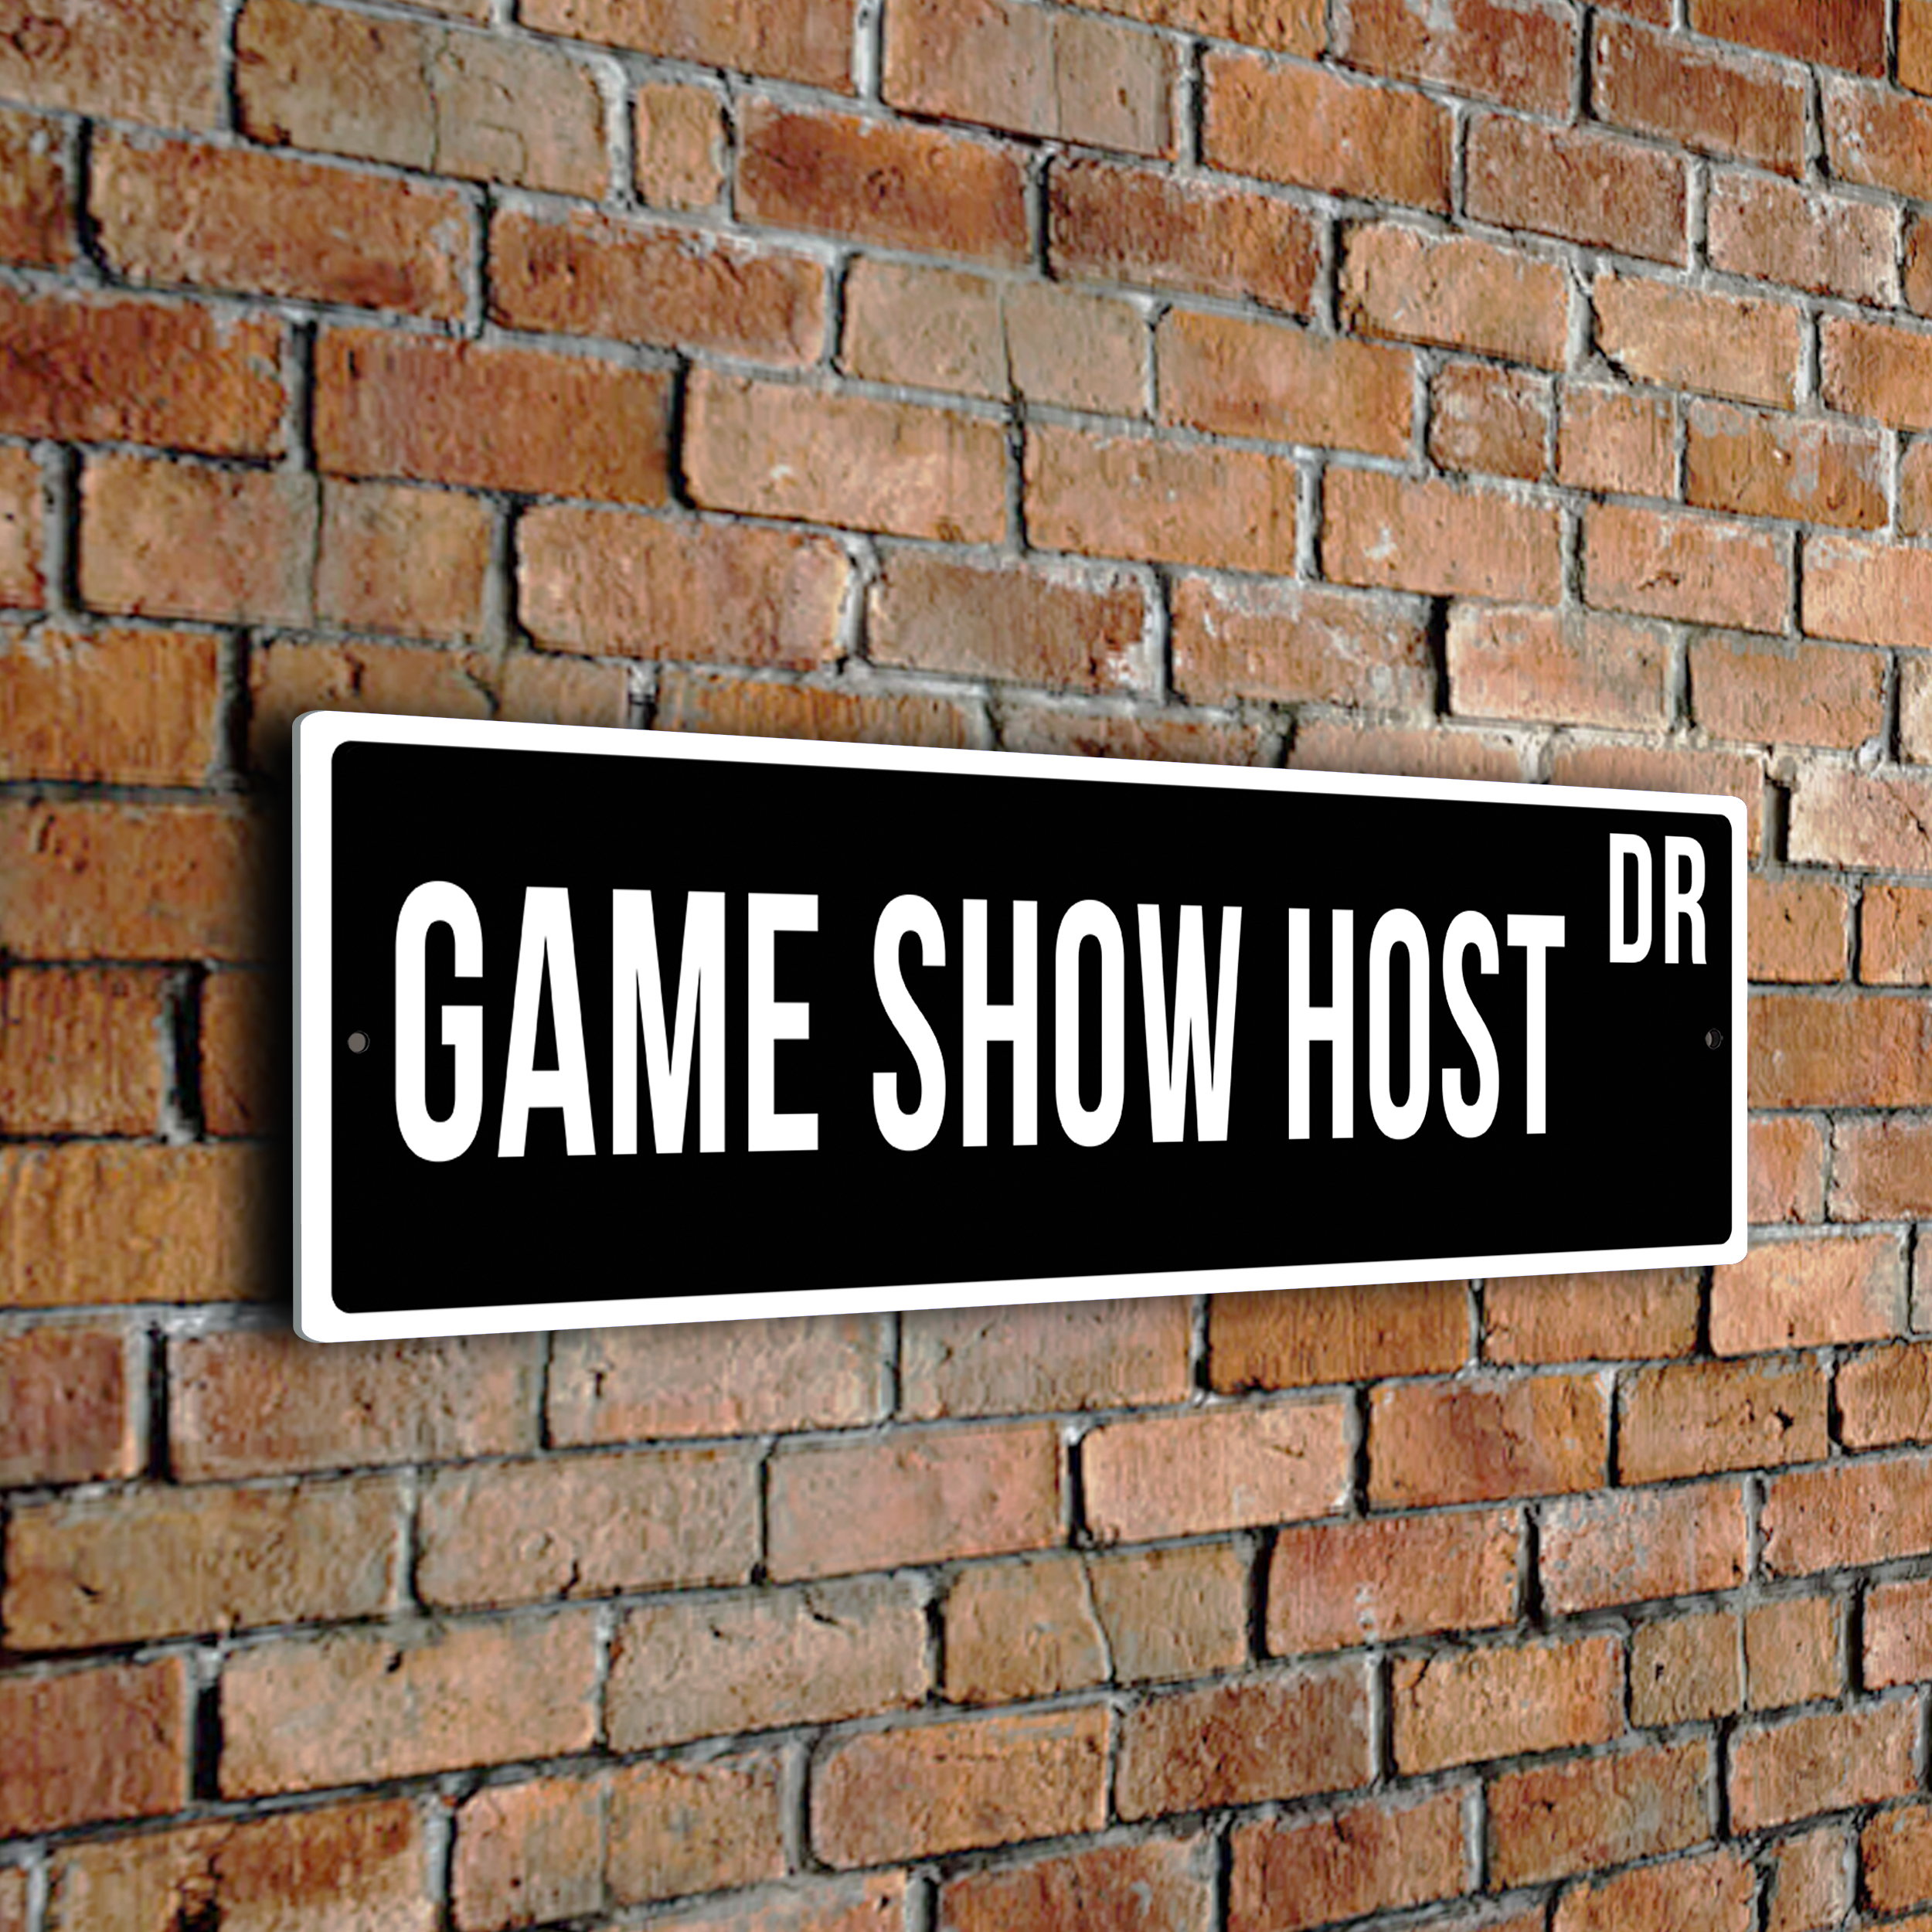 Game Show Host street sign